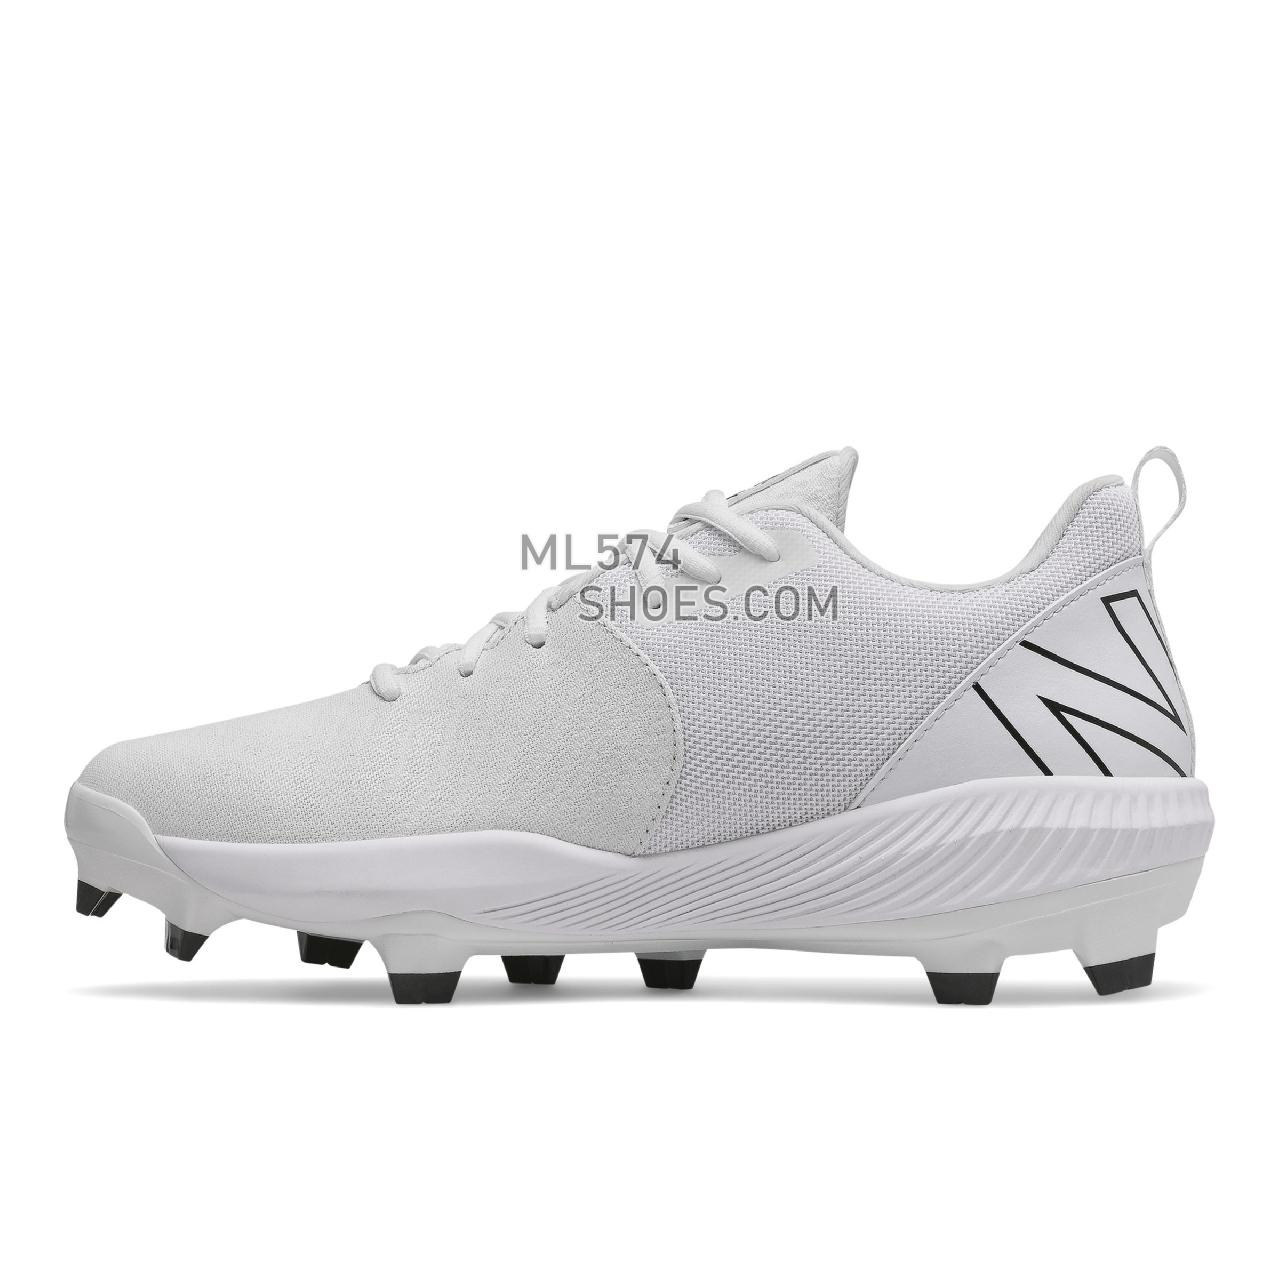 New Balance FuelCell 4040 v6 Molded - Men's Mid-Cut Baseball Cleats - White with Black - PL4040W6